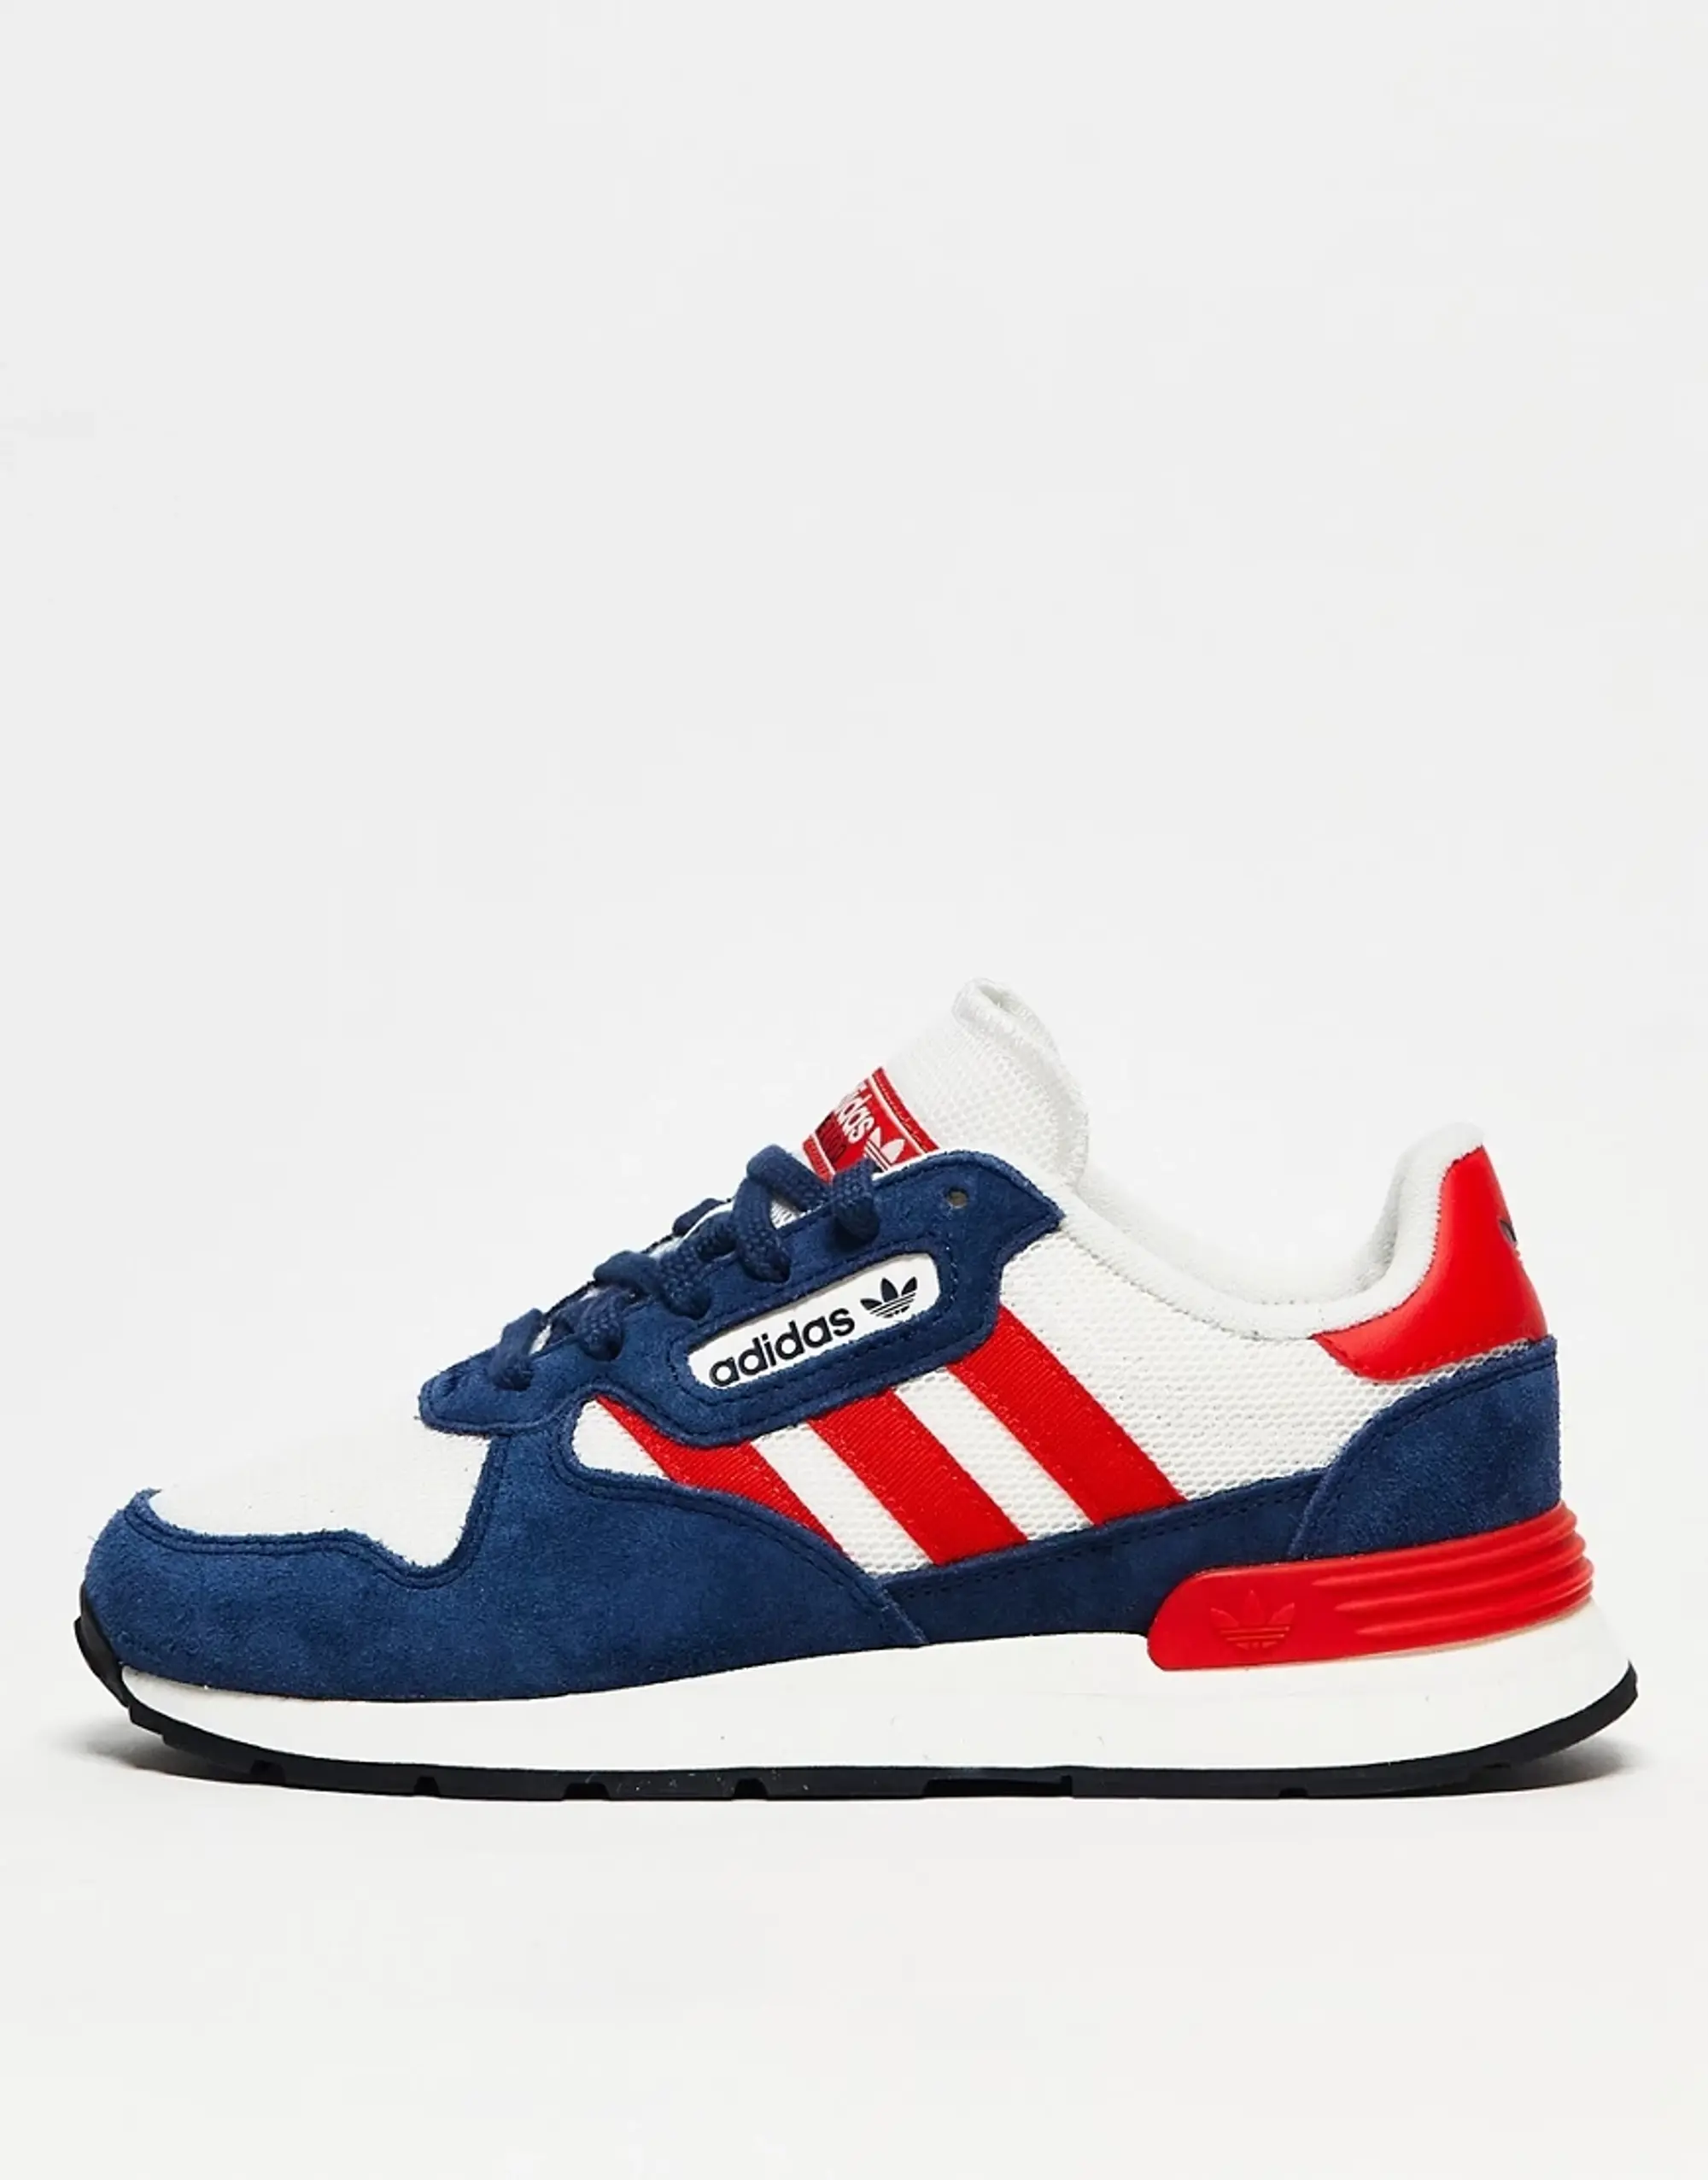 Adidas Originals Trezoid 2 Trainers In Navy And Red